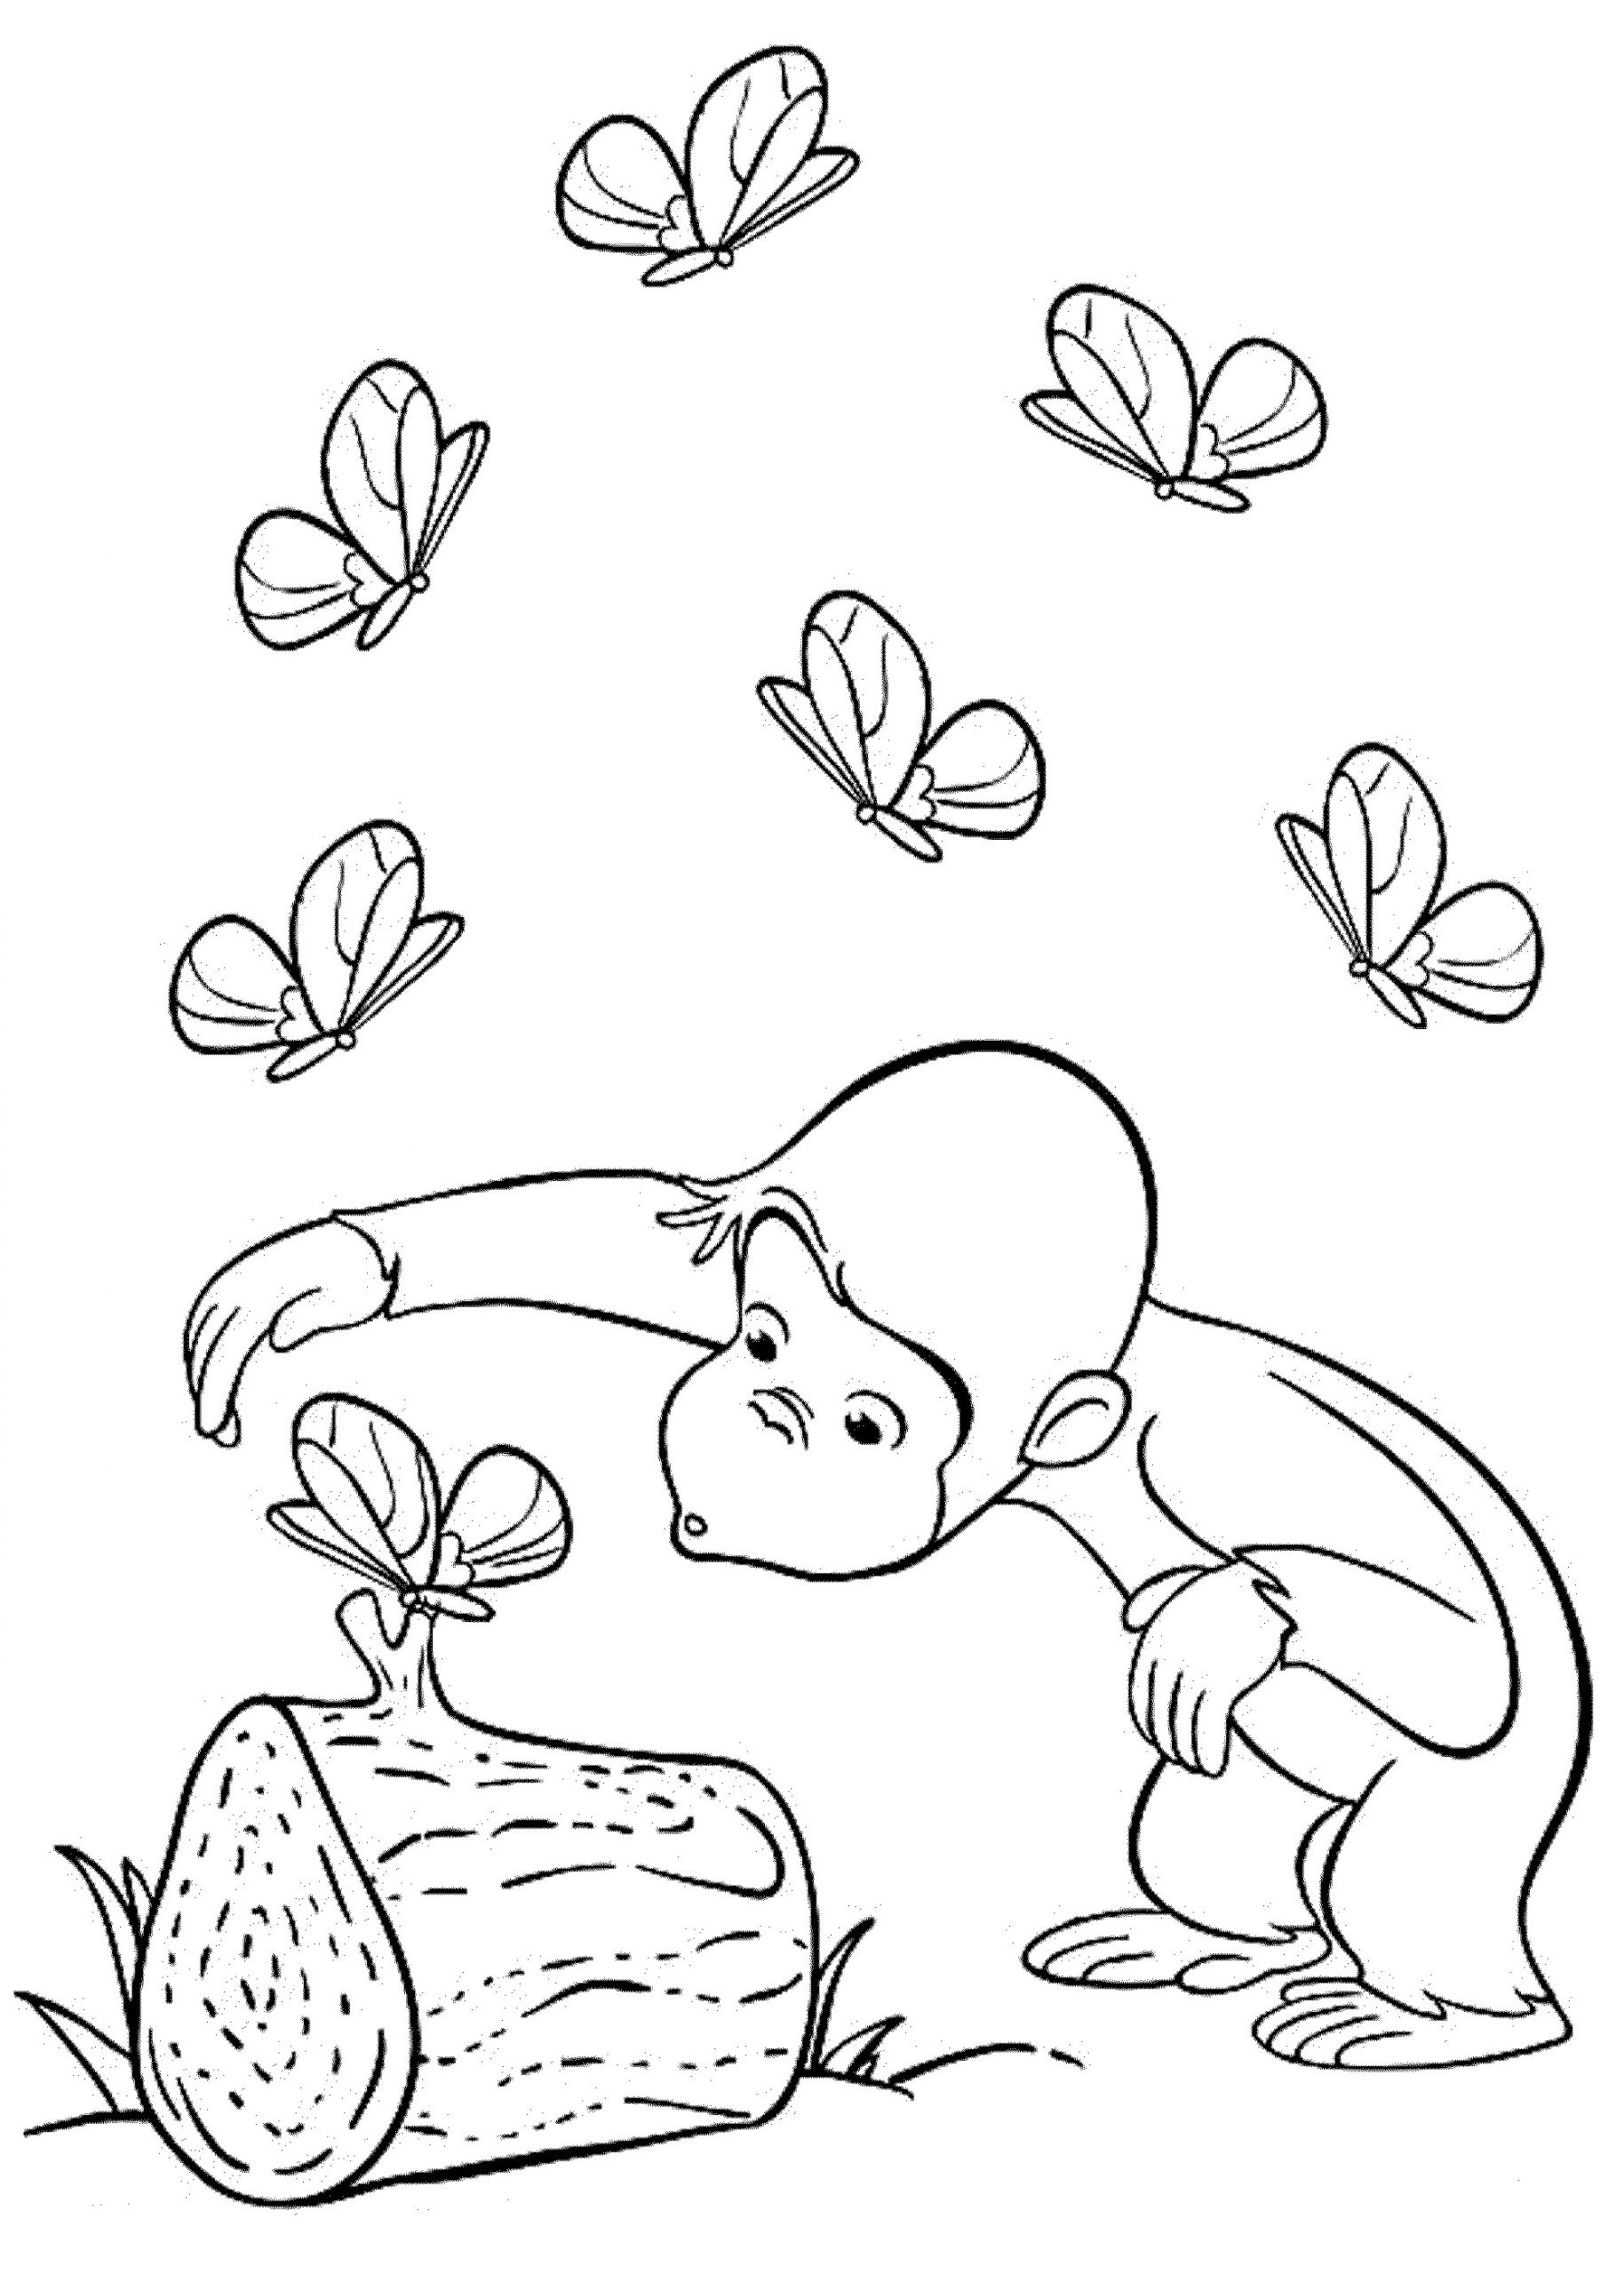 Coloring Pages For Toddlers Printable
 Curious George Coloring Pages Best Coloring Pages For Kids